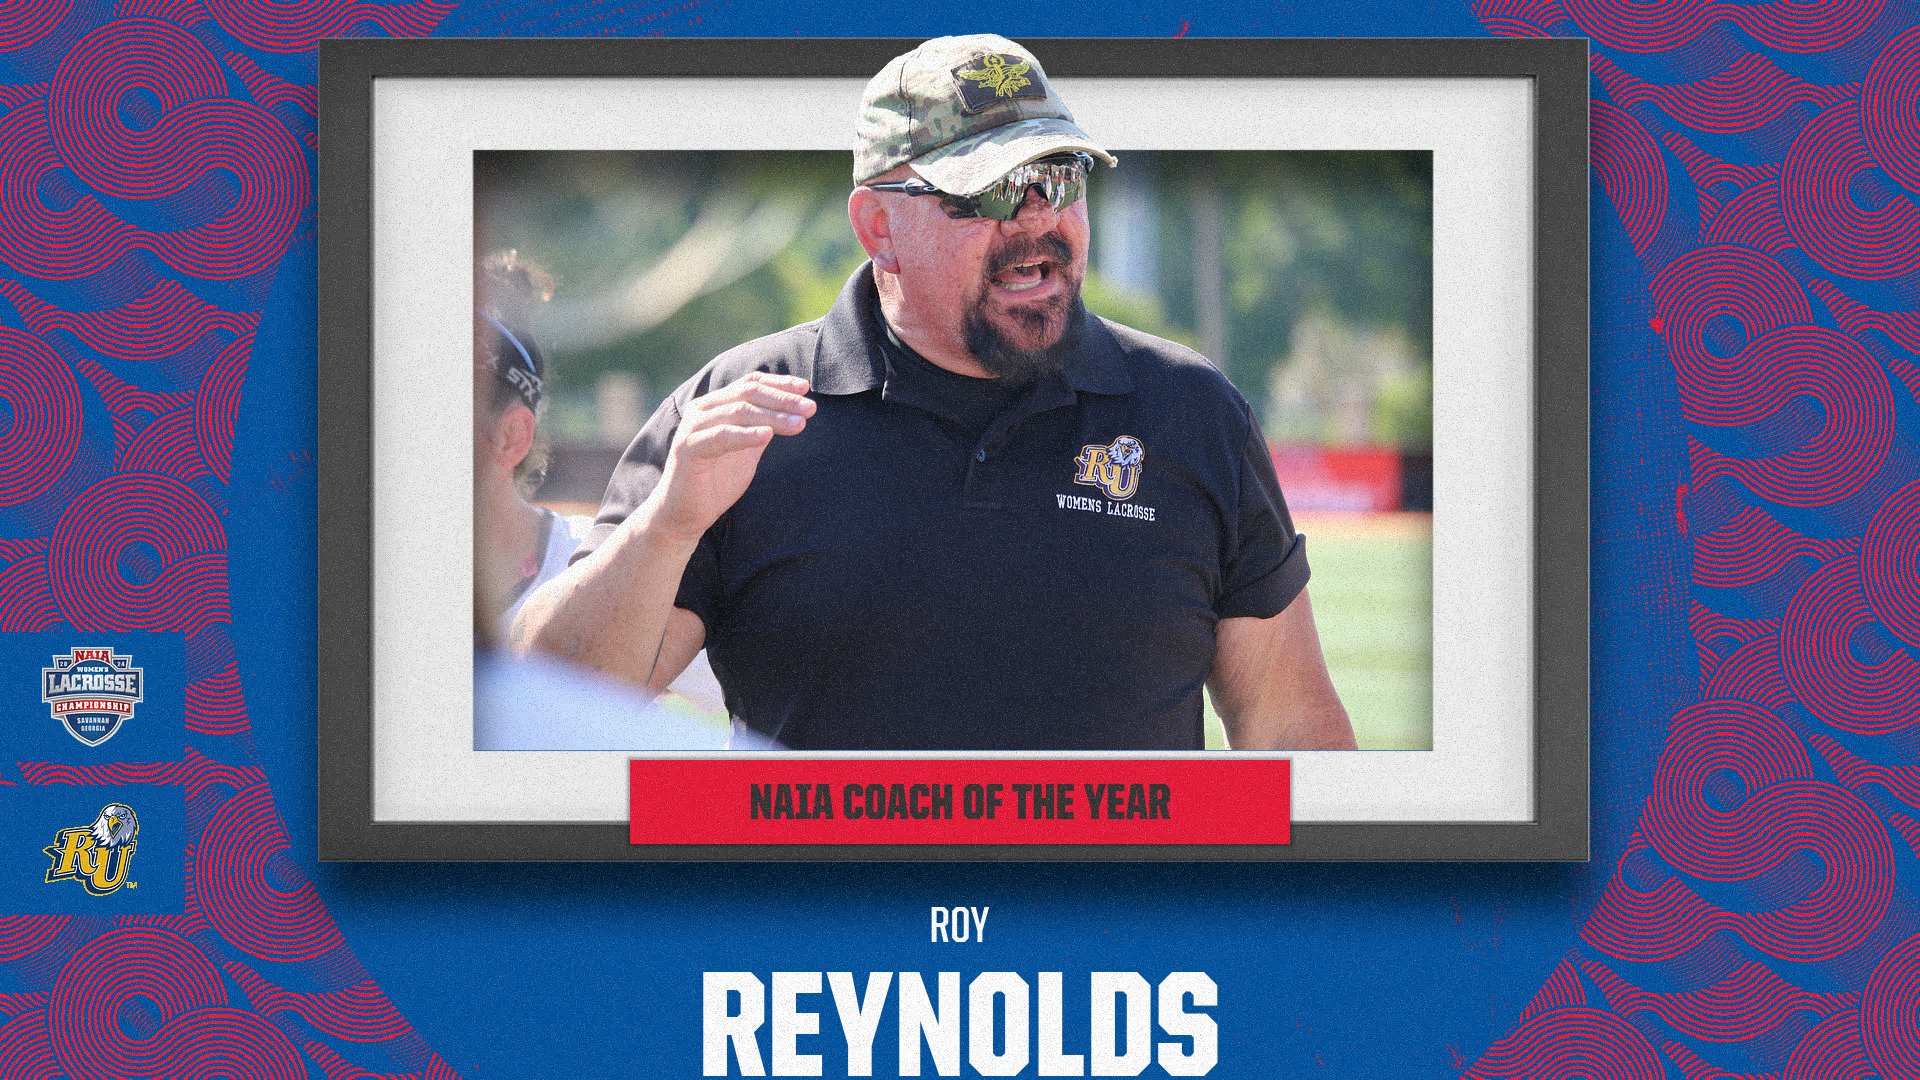 Reinhardt's Reynolds Named NAIA Coach of the Year; AAC Sees 14 Earn All-America Team Honors